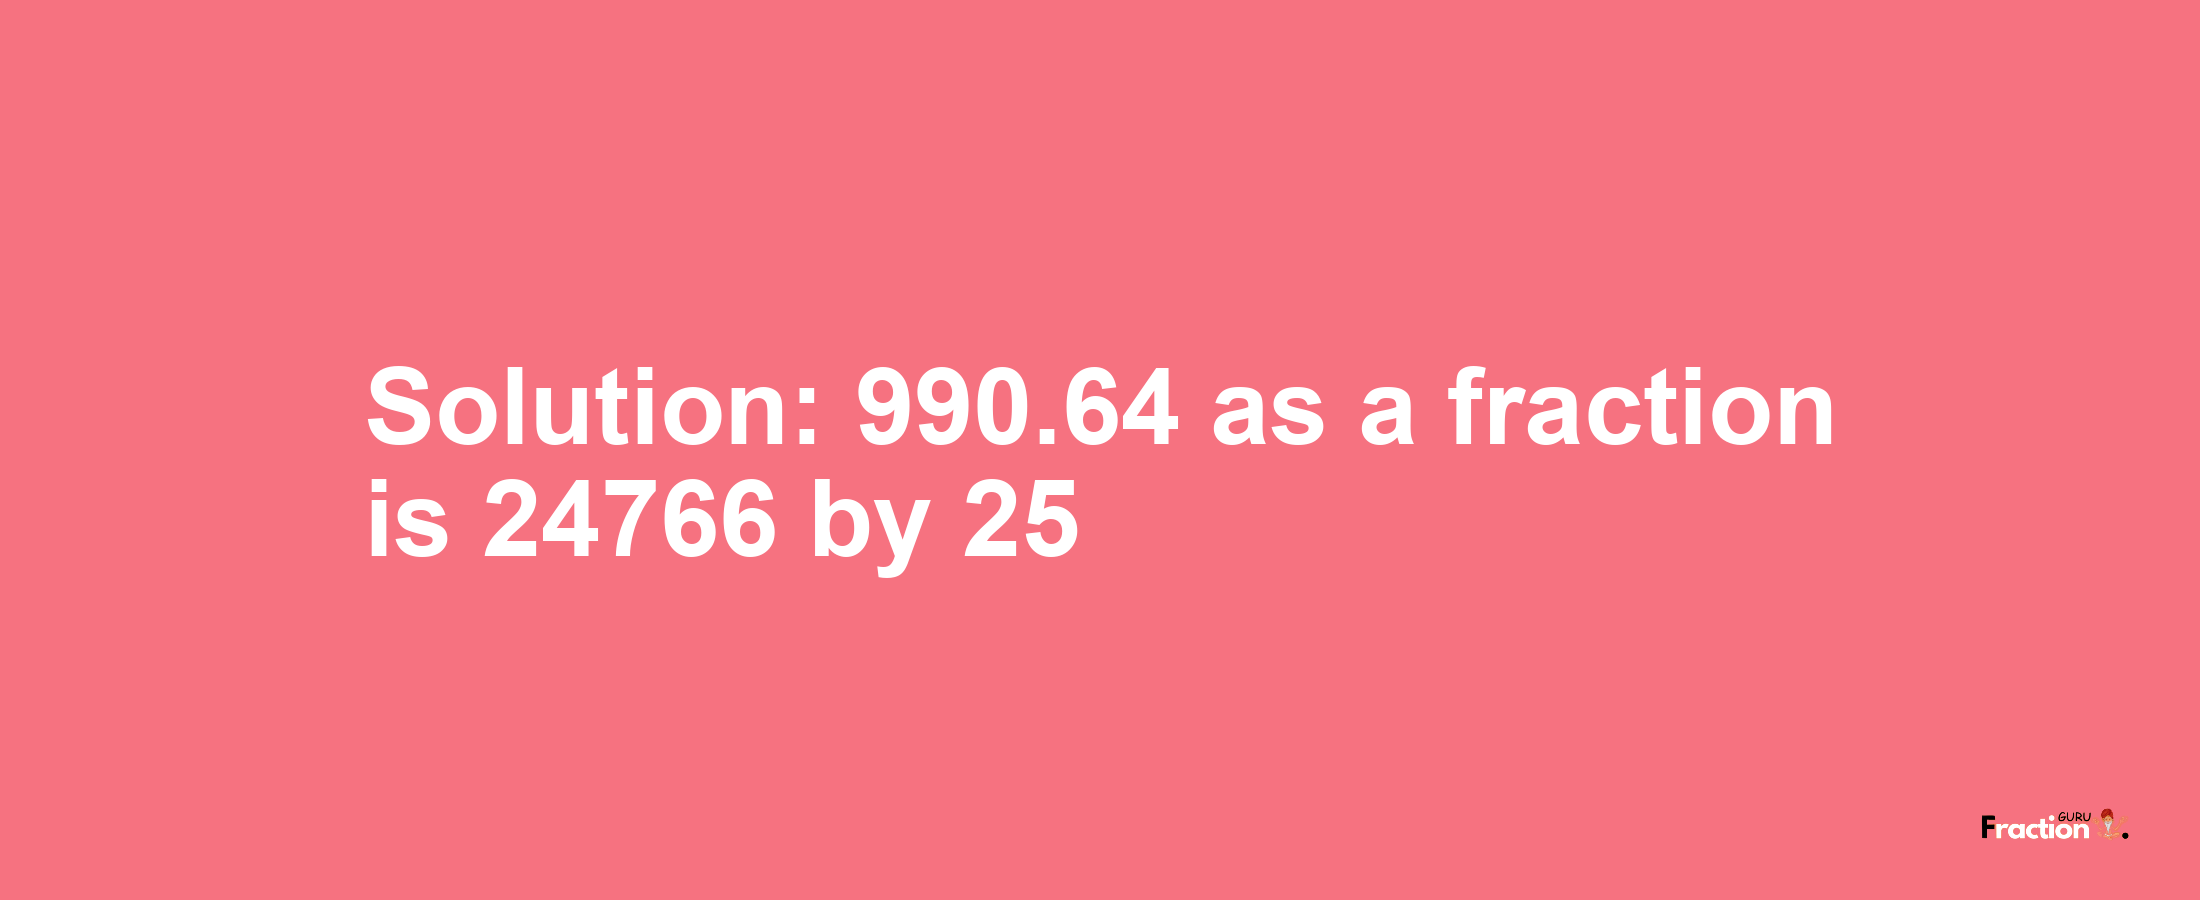 Solution:990.64 as a fraction is 24766/25